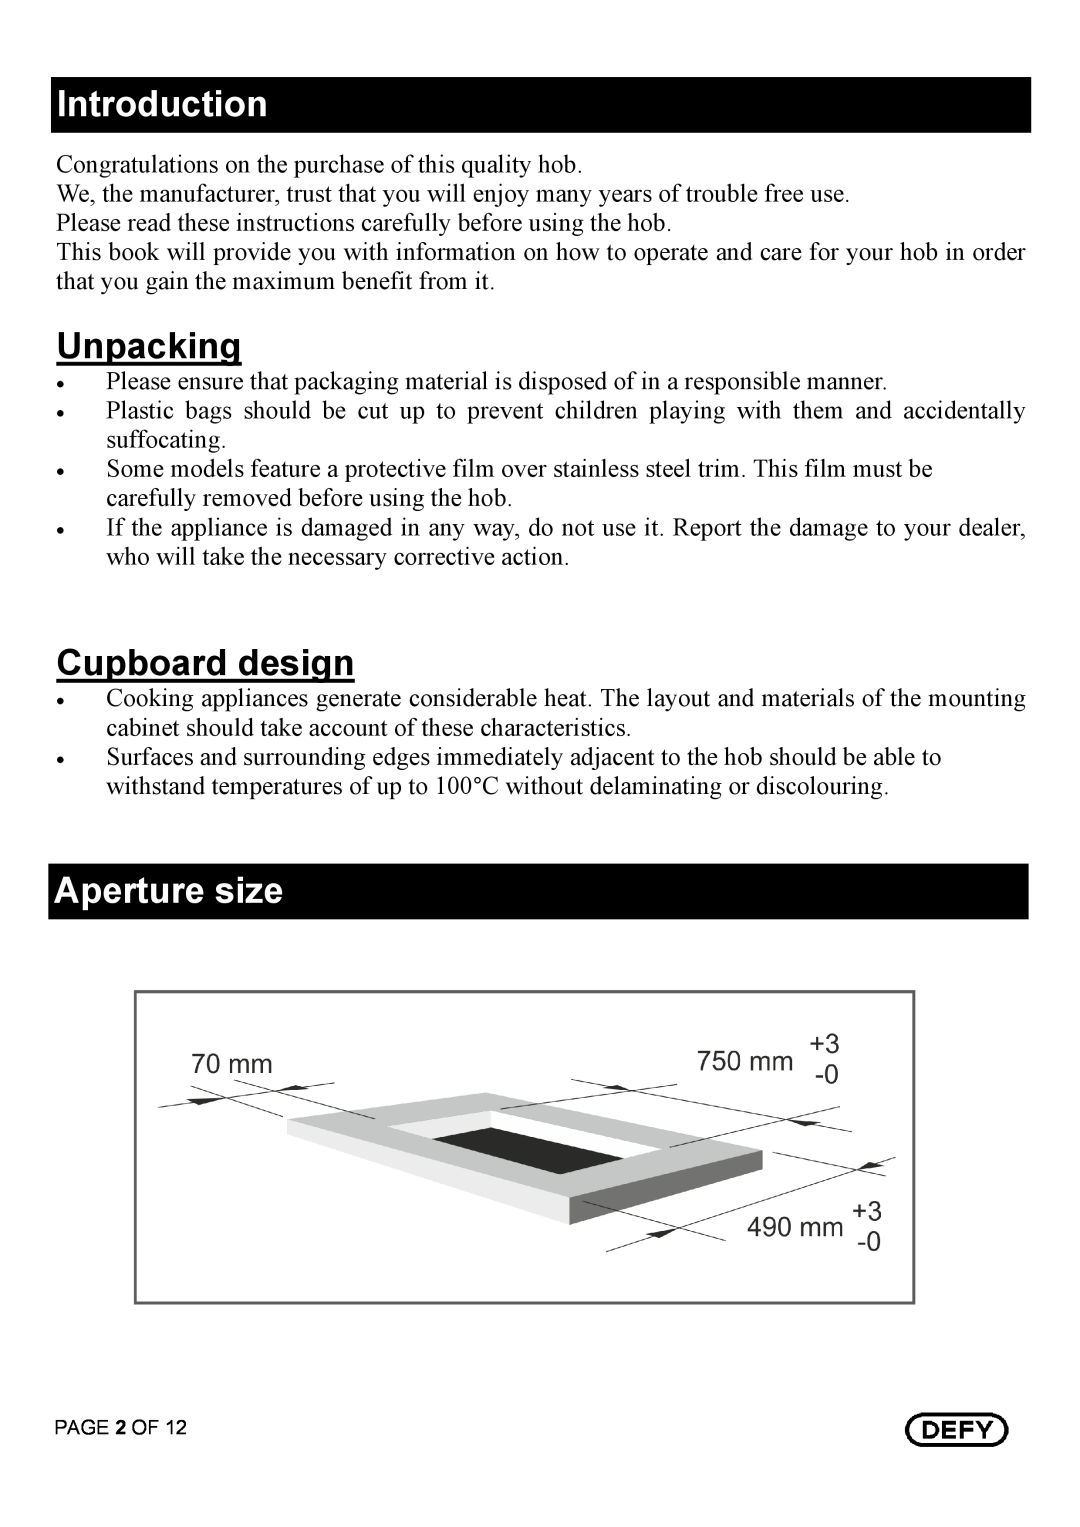 Defy Appliances DHD 395 owner manual Introduction, Unpacking, Cupboard design, Aperture size 